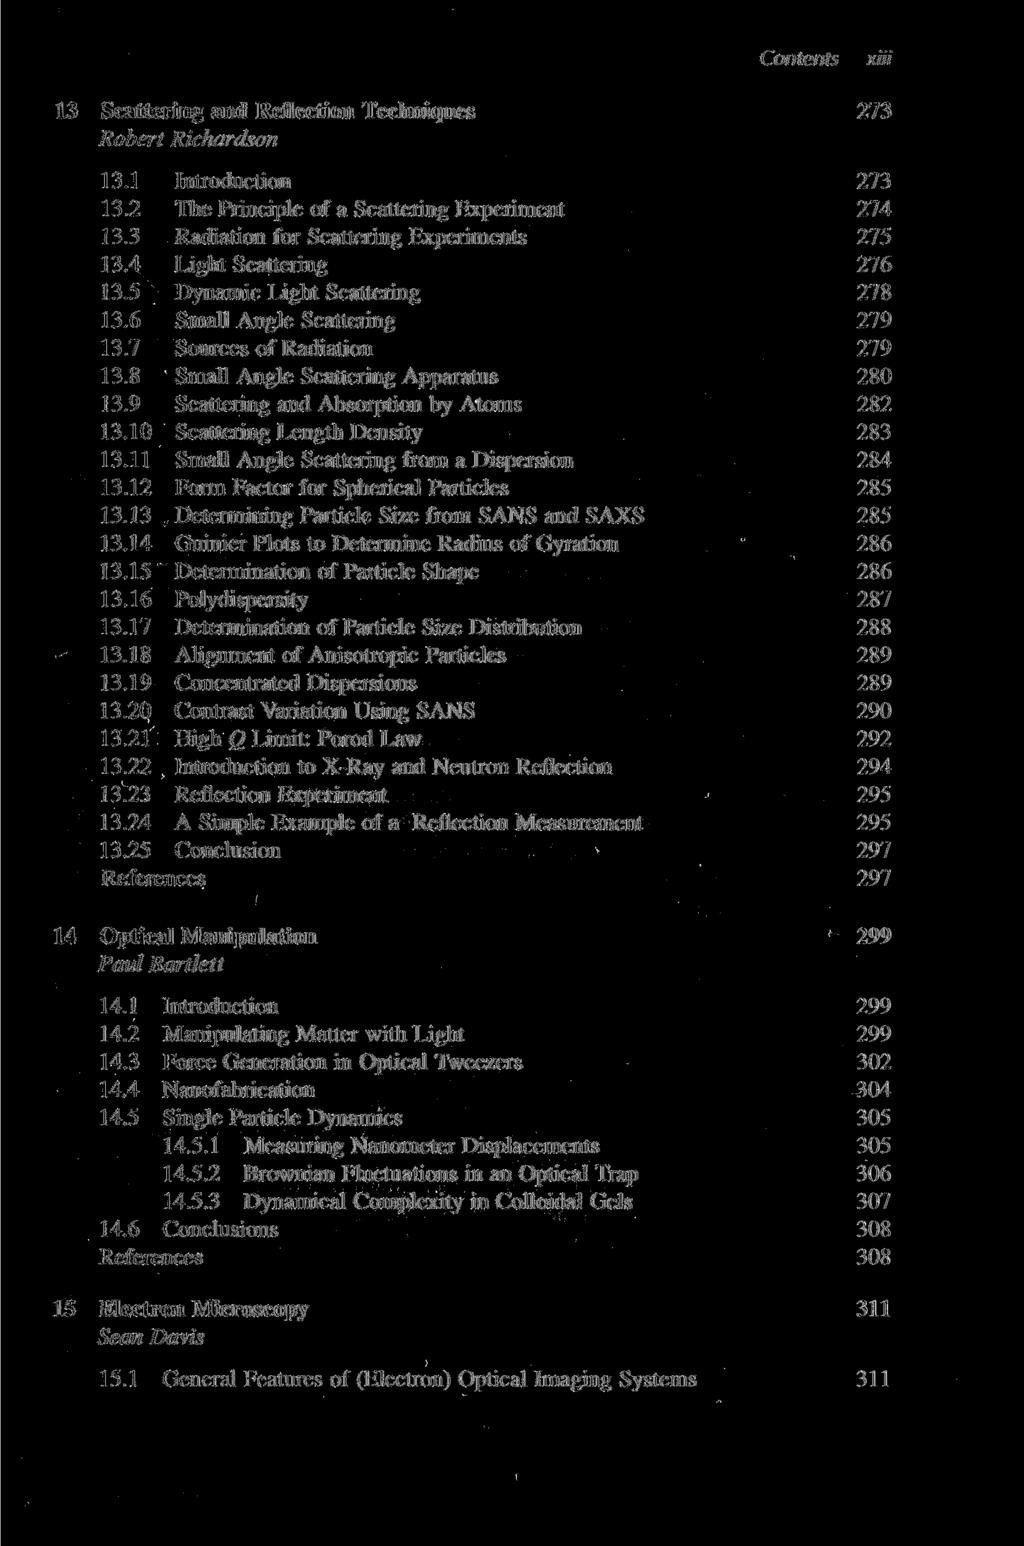 Contents xiii 13 Scattering and Reflection Techniques 273 Robert Richardson 13.1 Introduction 273 13.2 The Principle of a Scattering Experiment 274 13.3 Radiation for Scattering Experiments 275 13.